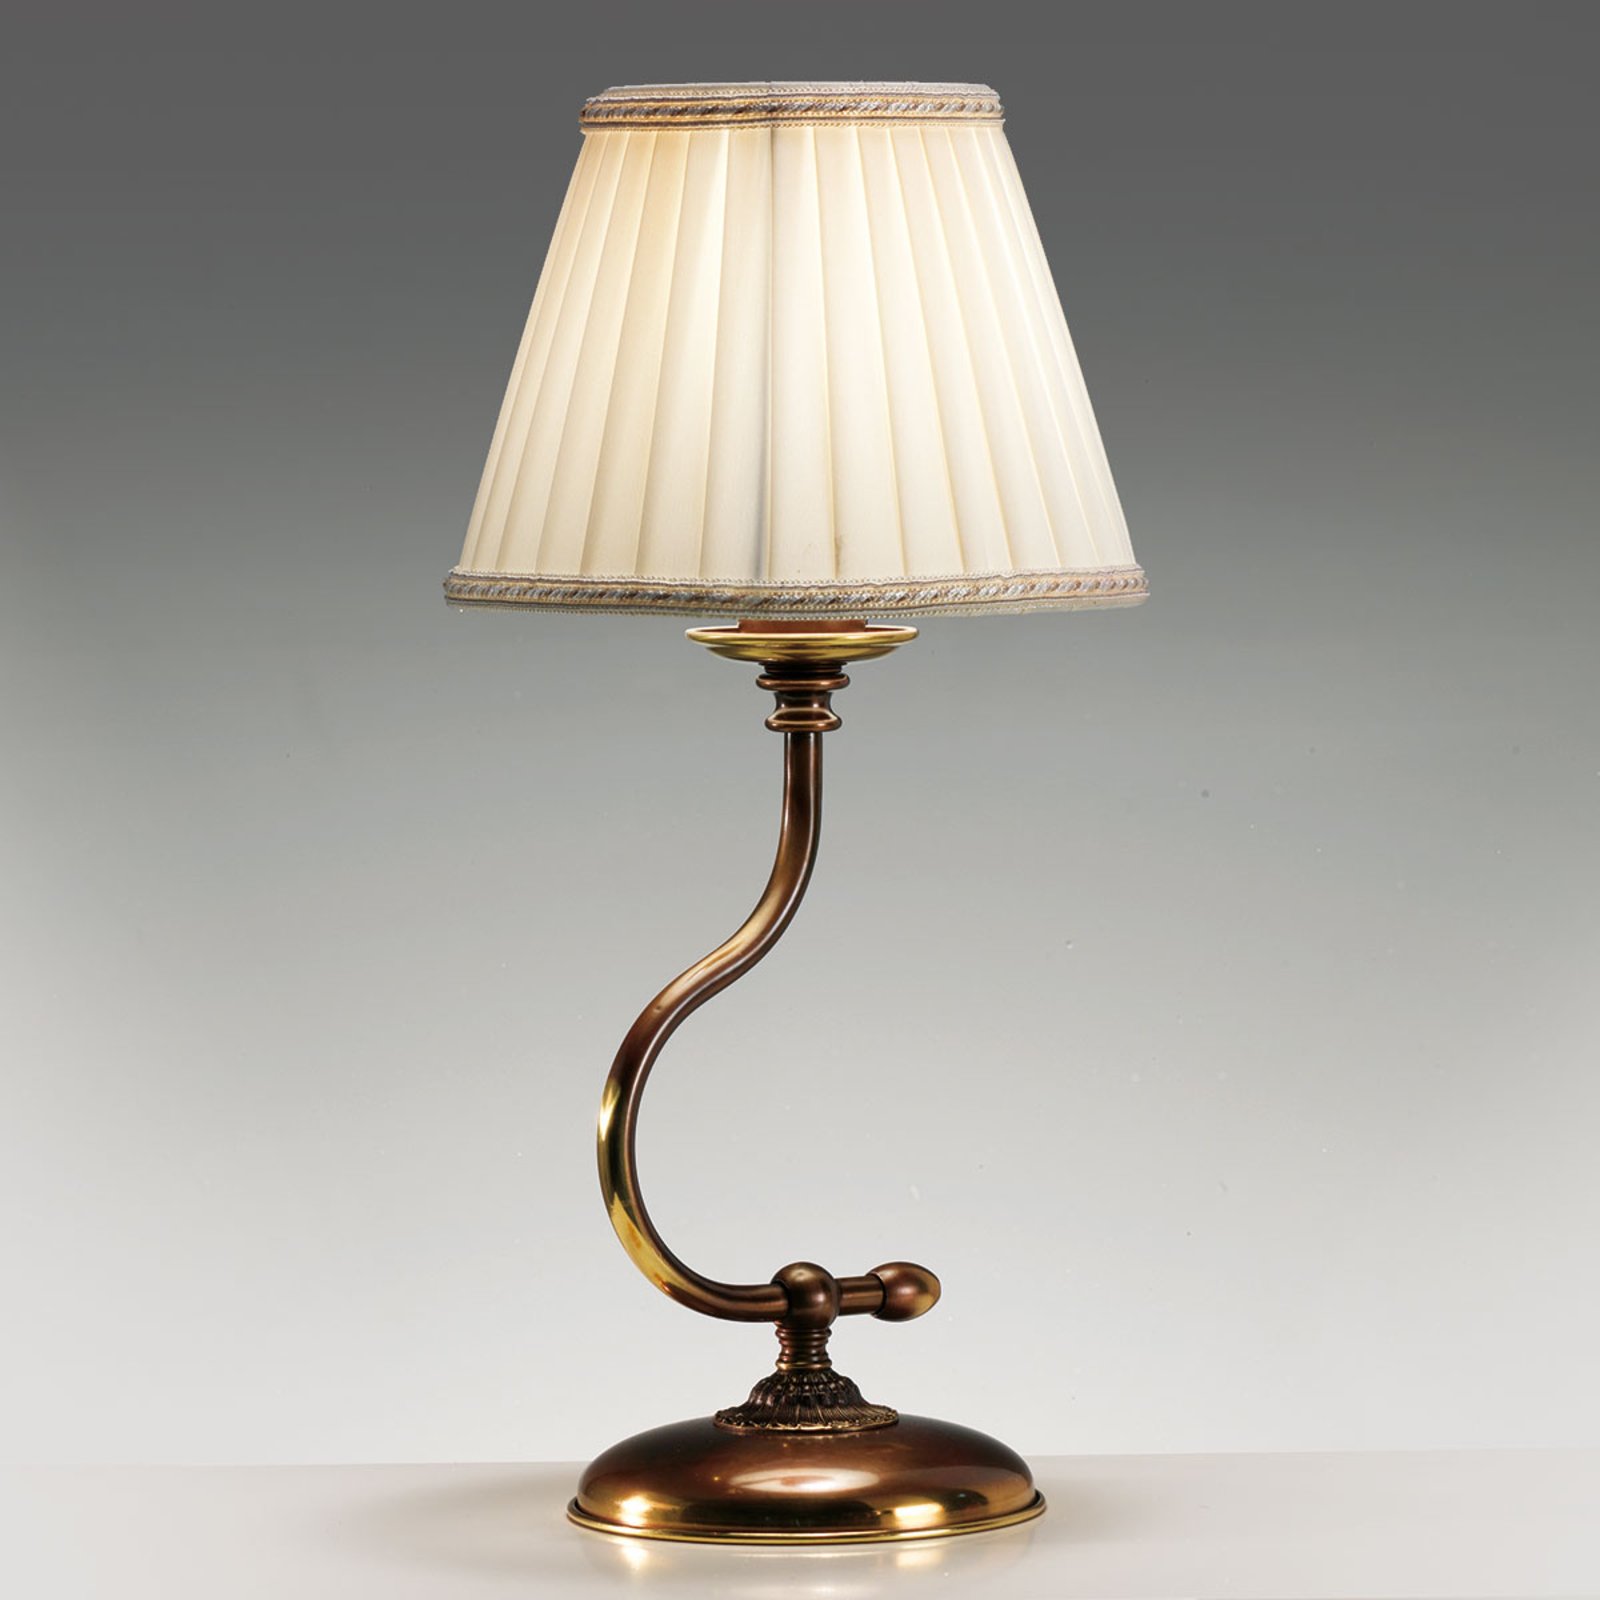 Classic - table lamp with a curved frame